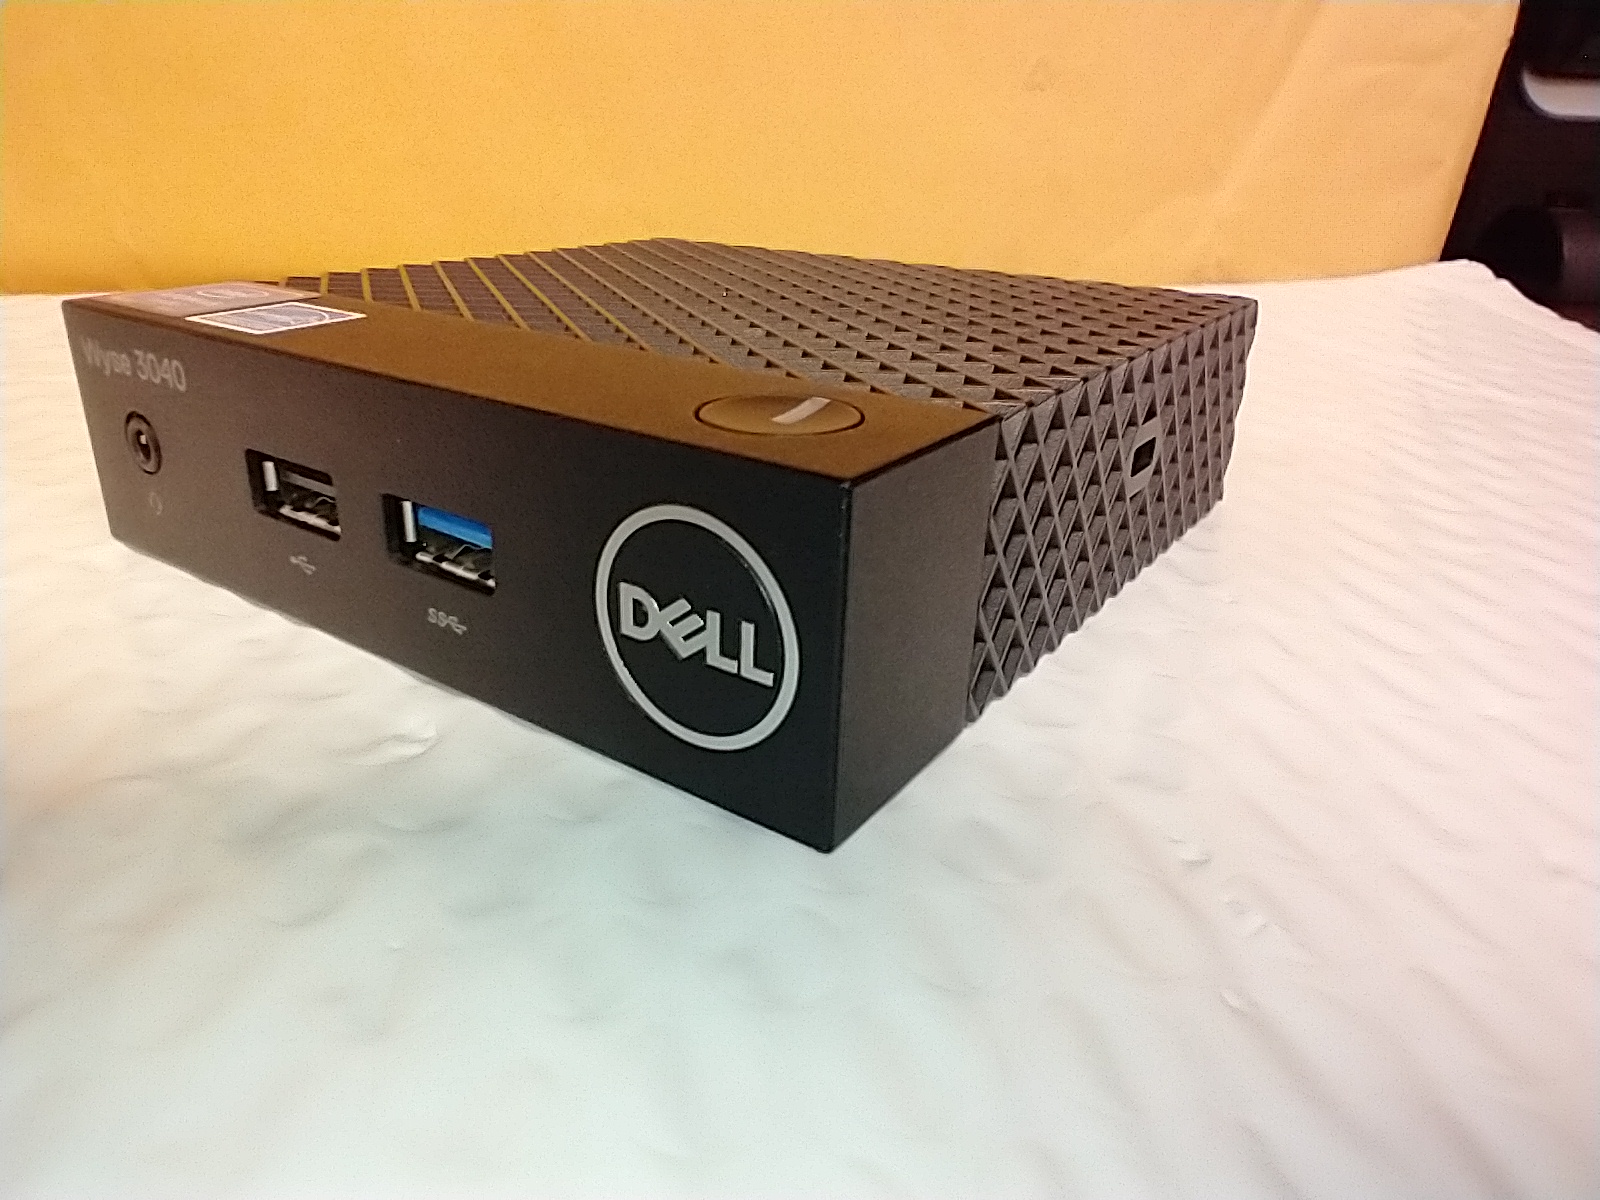 UniFi Controller on a Dell Wyse 3040 Thin Client - Networking & Firewalls -  Lawrence Systems Forums